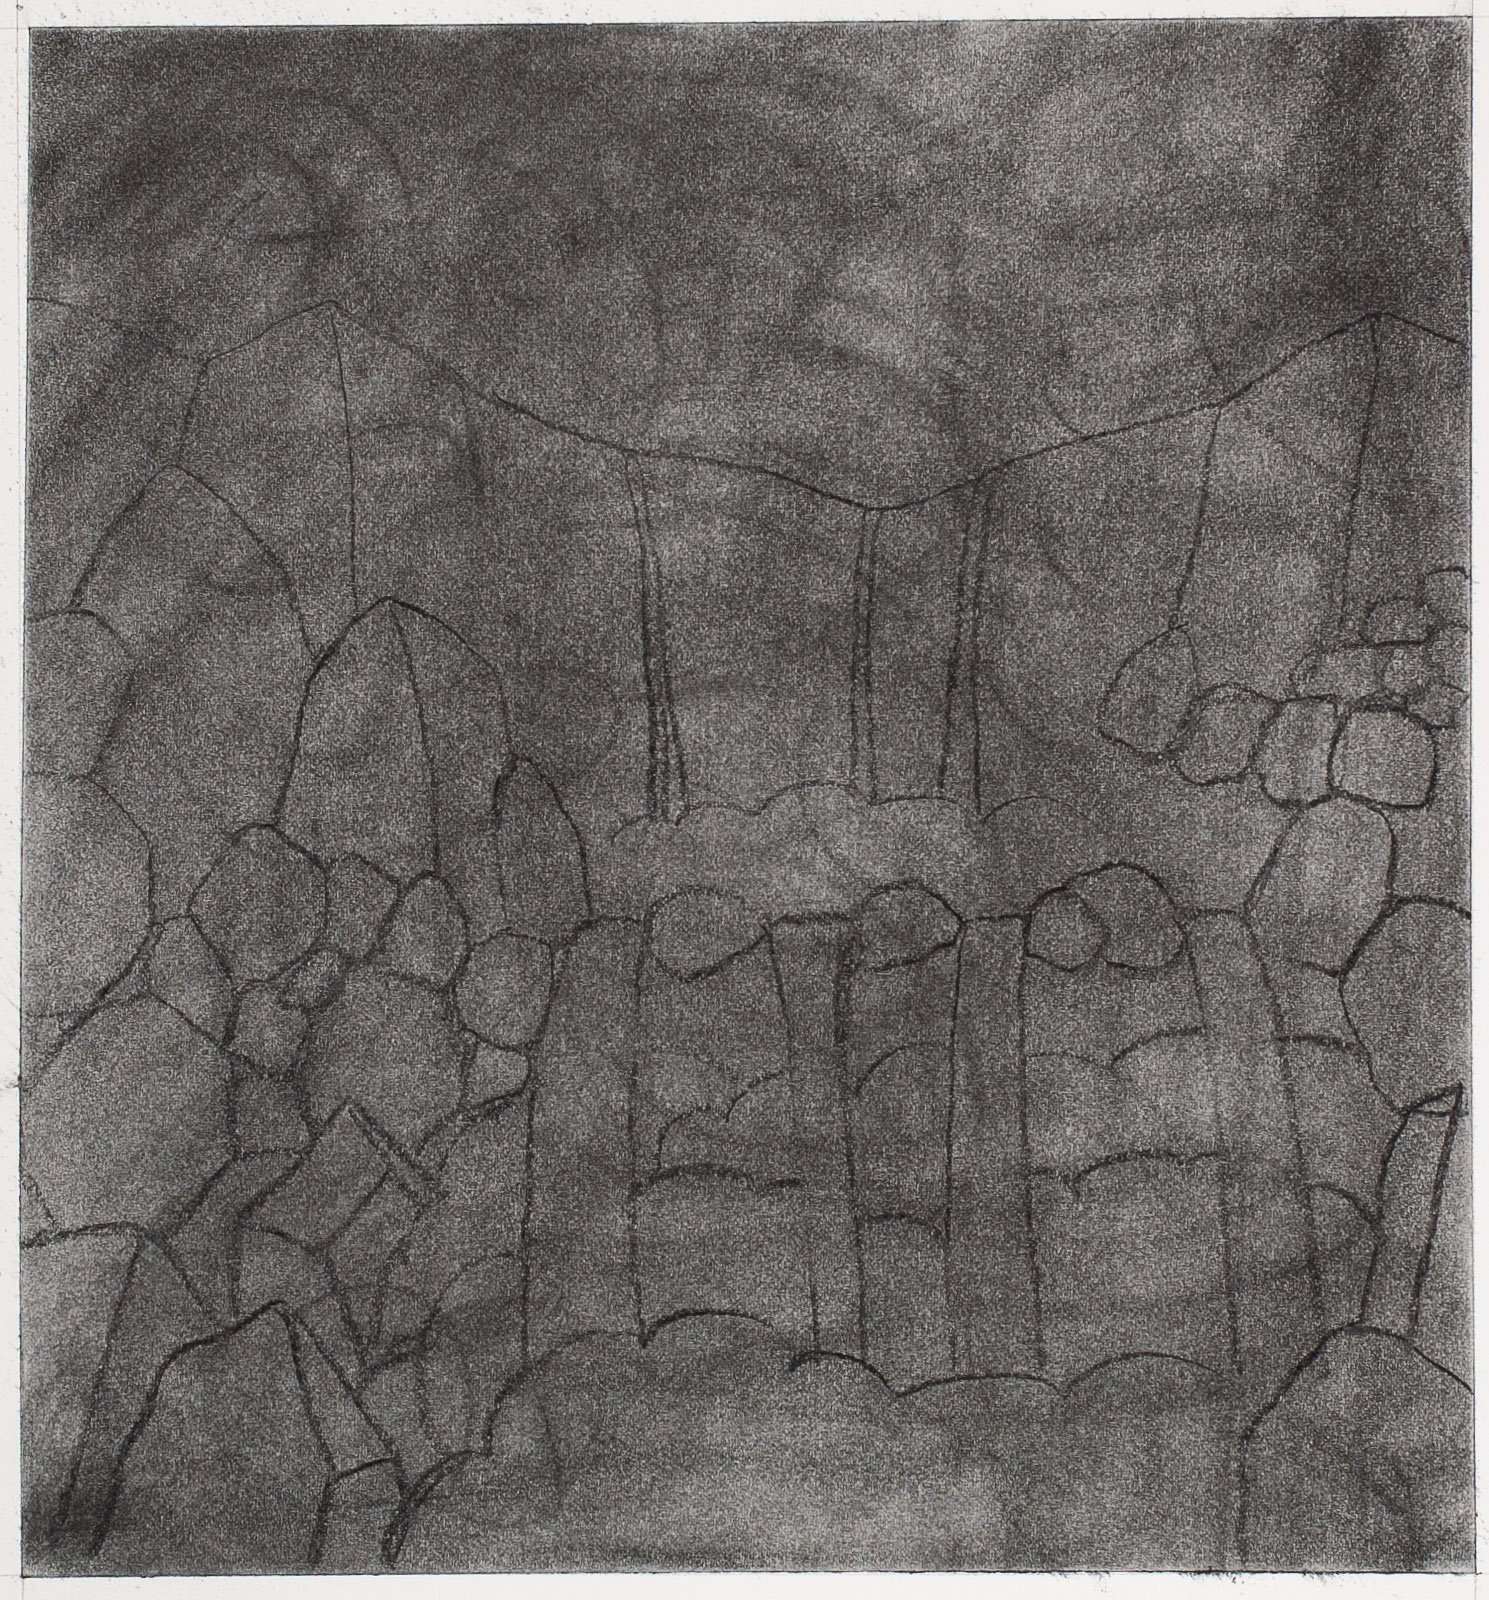   Falls   Charcoal on paper  16 X 15  inches  2023 